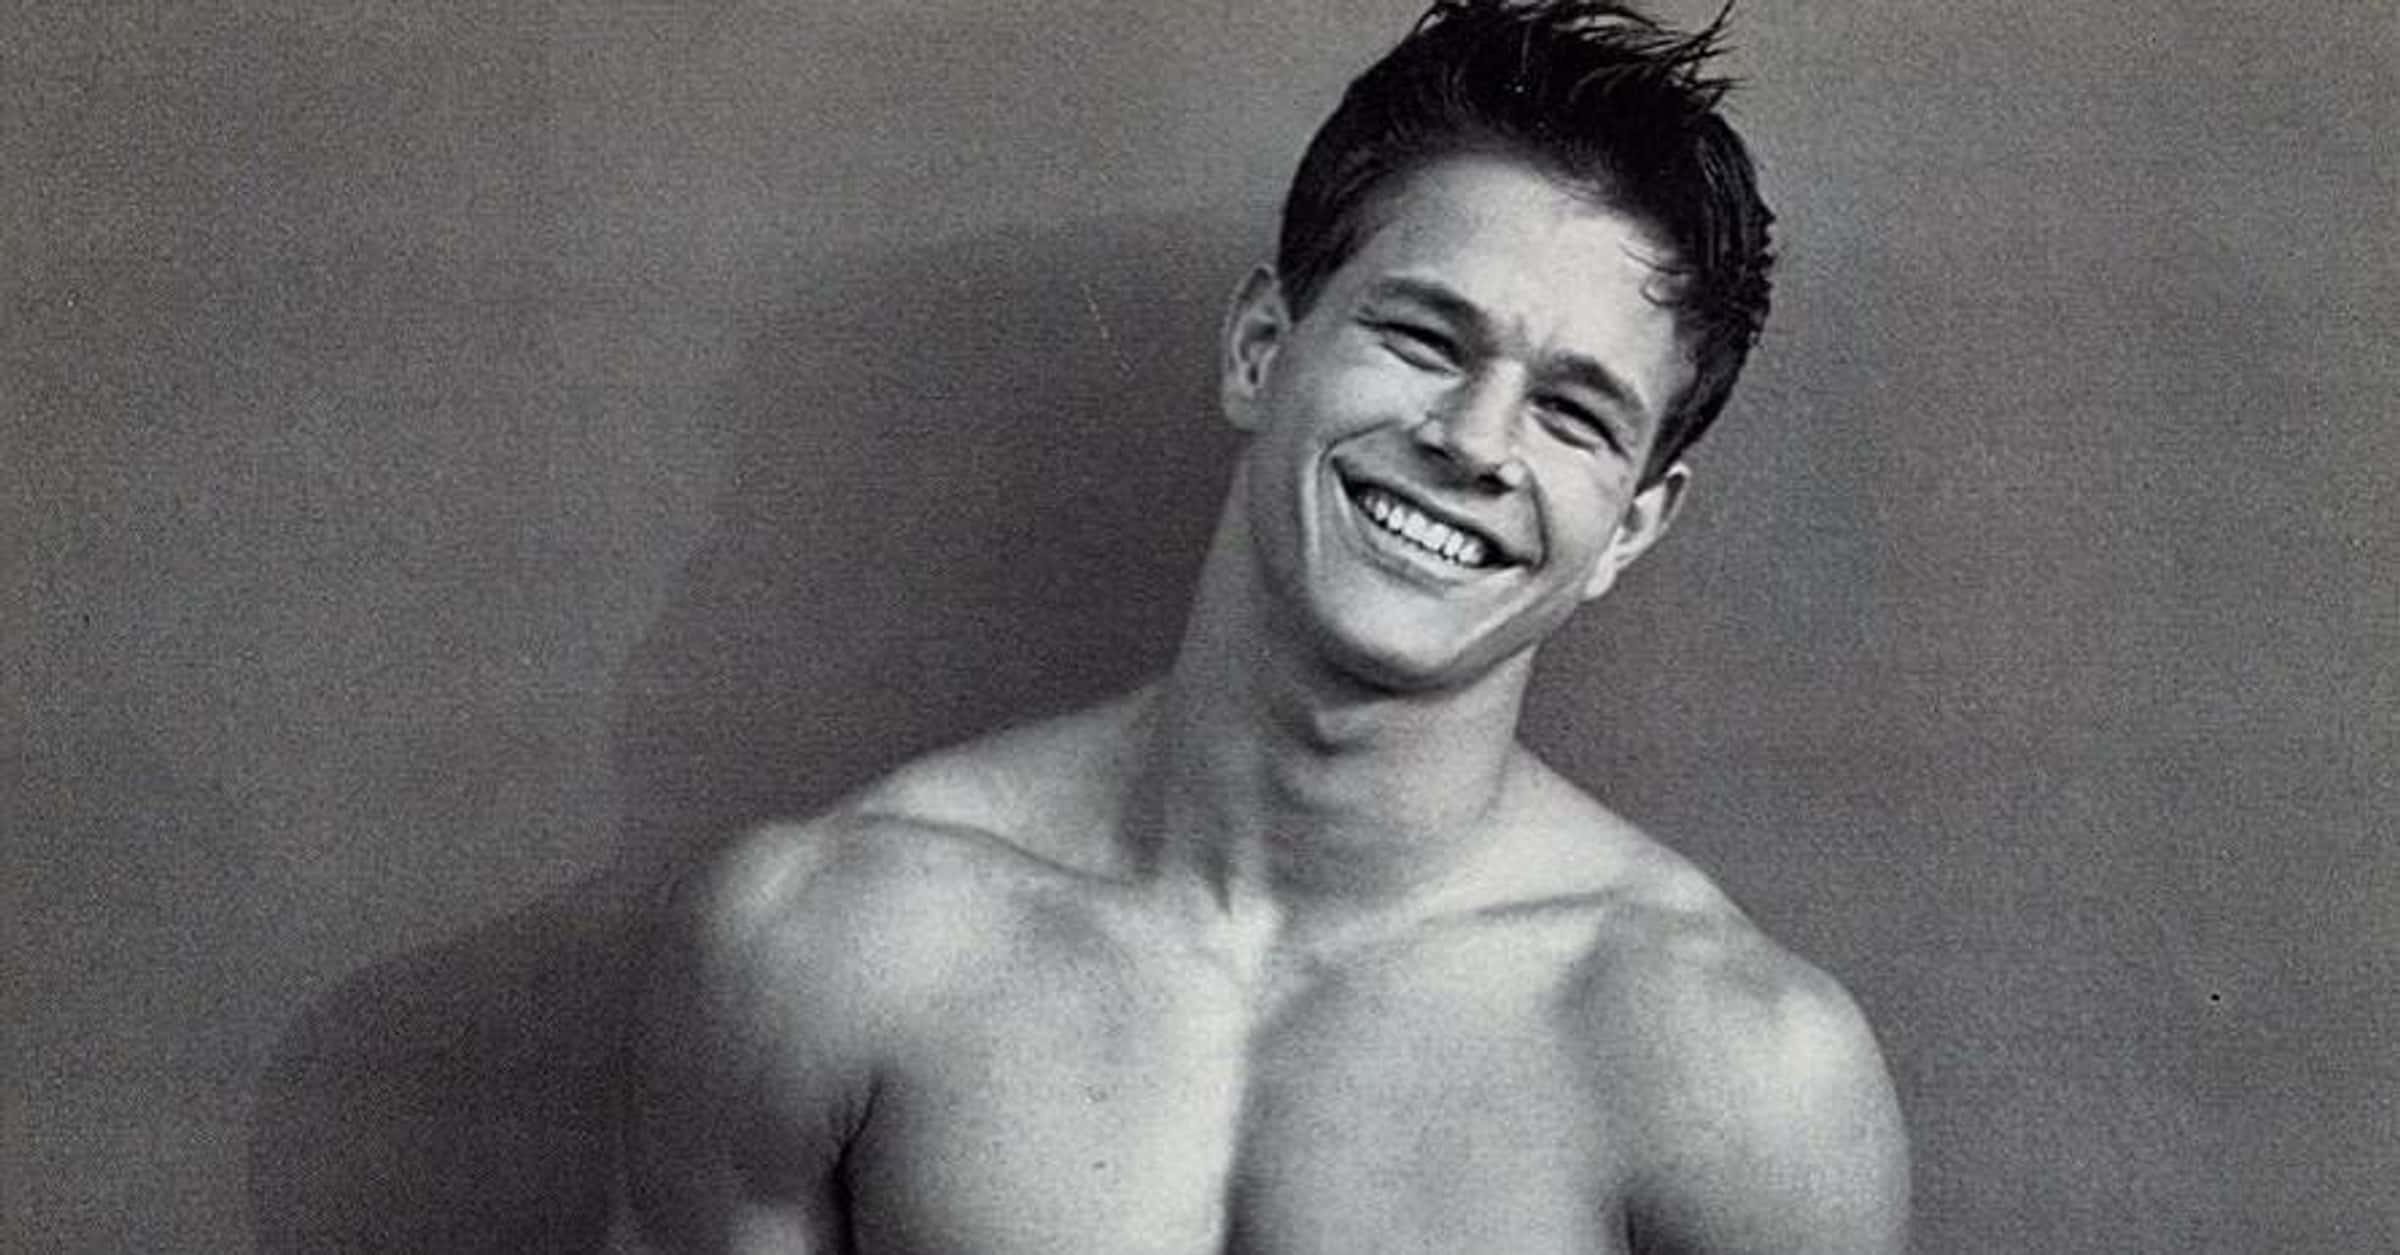 A young Mark Wahlberg